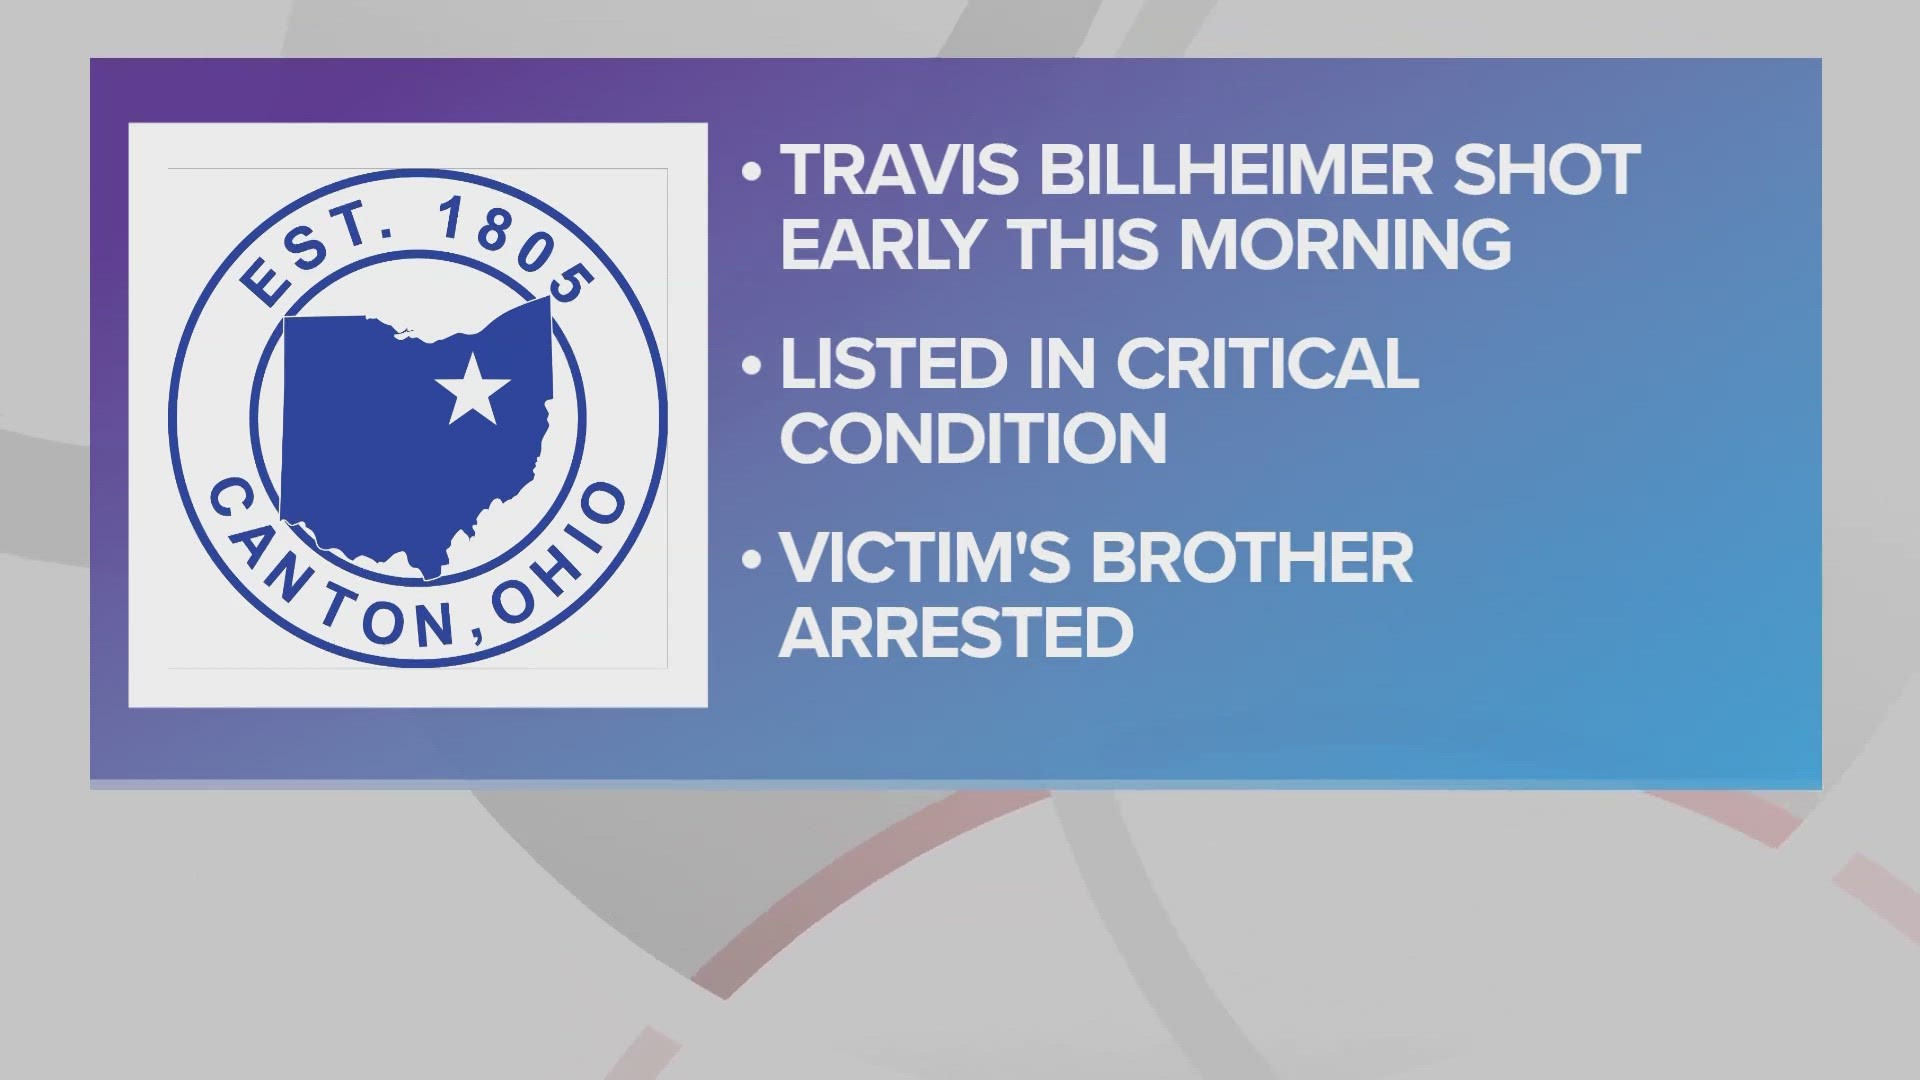 The victim has been identified as 36-year-old Travis T. Billheimer of Canton.